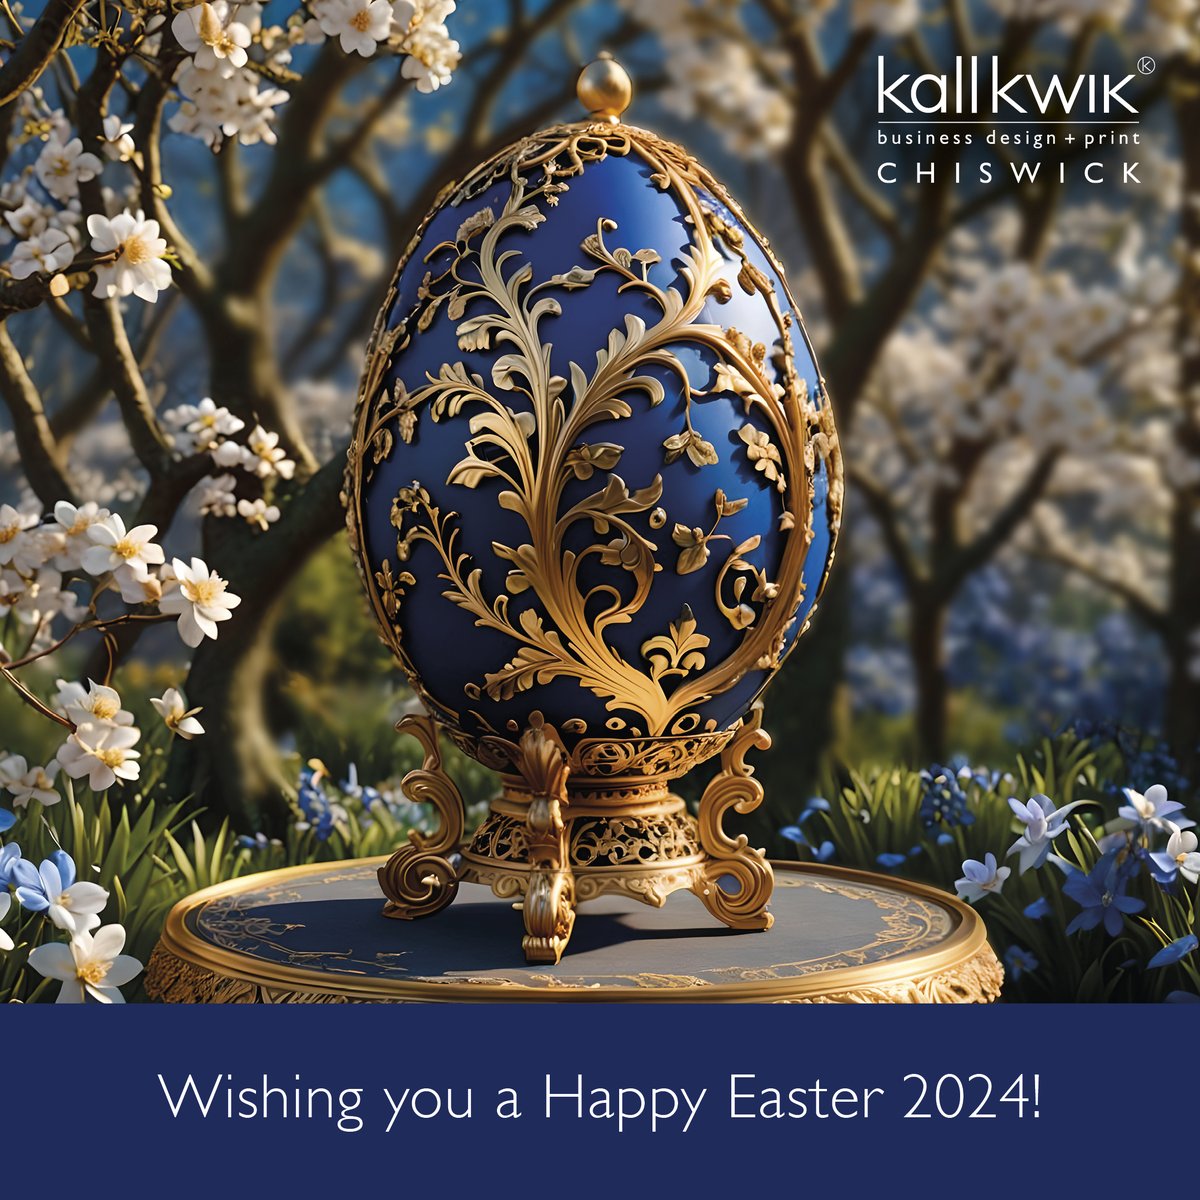 Wishing you a Happy Easter 2024!

#Chiswick #printing #printers #posters #bannerdesign #pullups #outdoordesign #outdoorbanner #graphicdesign #businesspromotion #personalise #bespoke #southwestlondonprint #popups #londonprinters #bannerstand #accreditations #lanyards